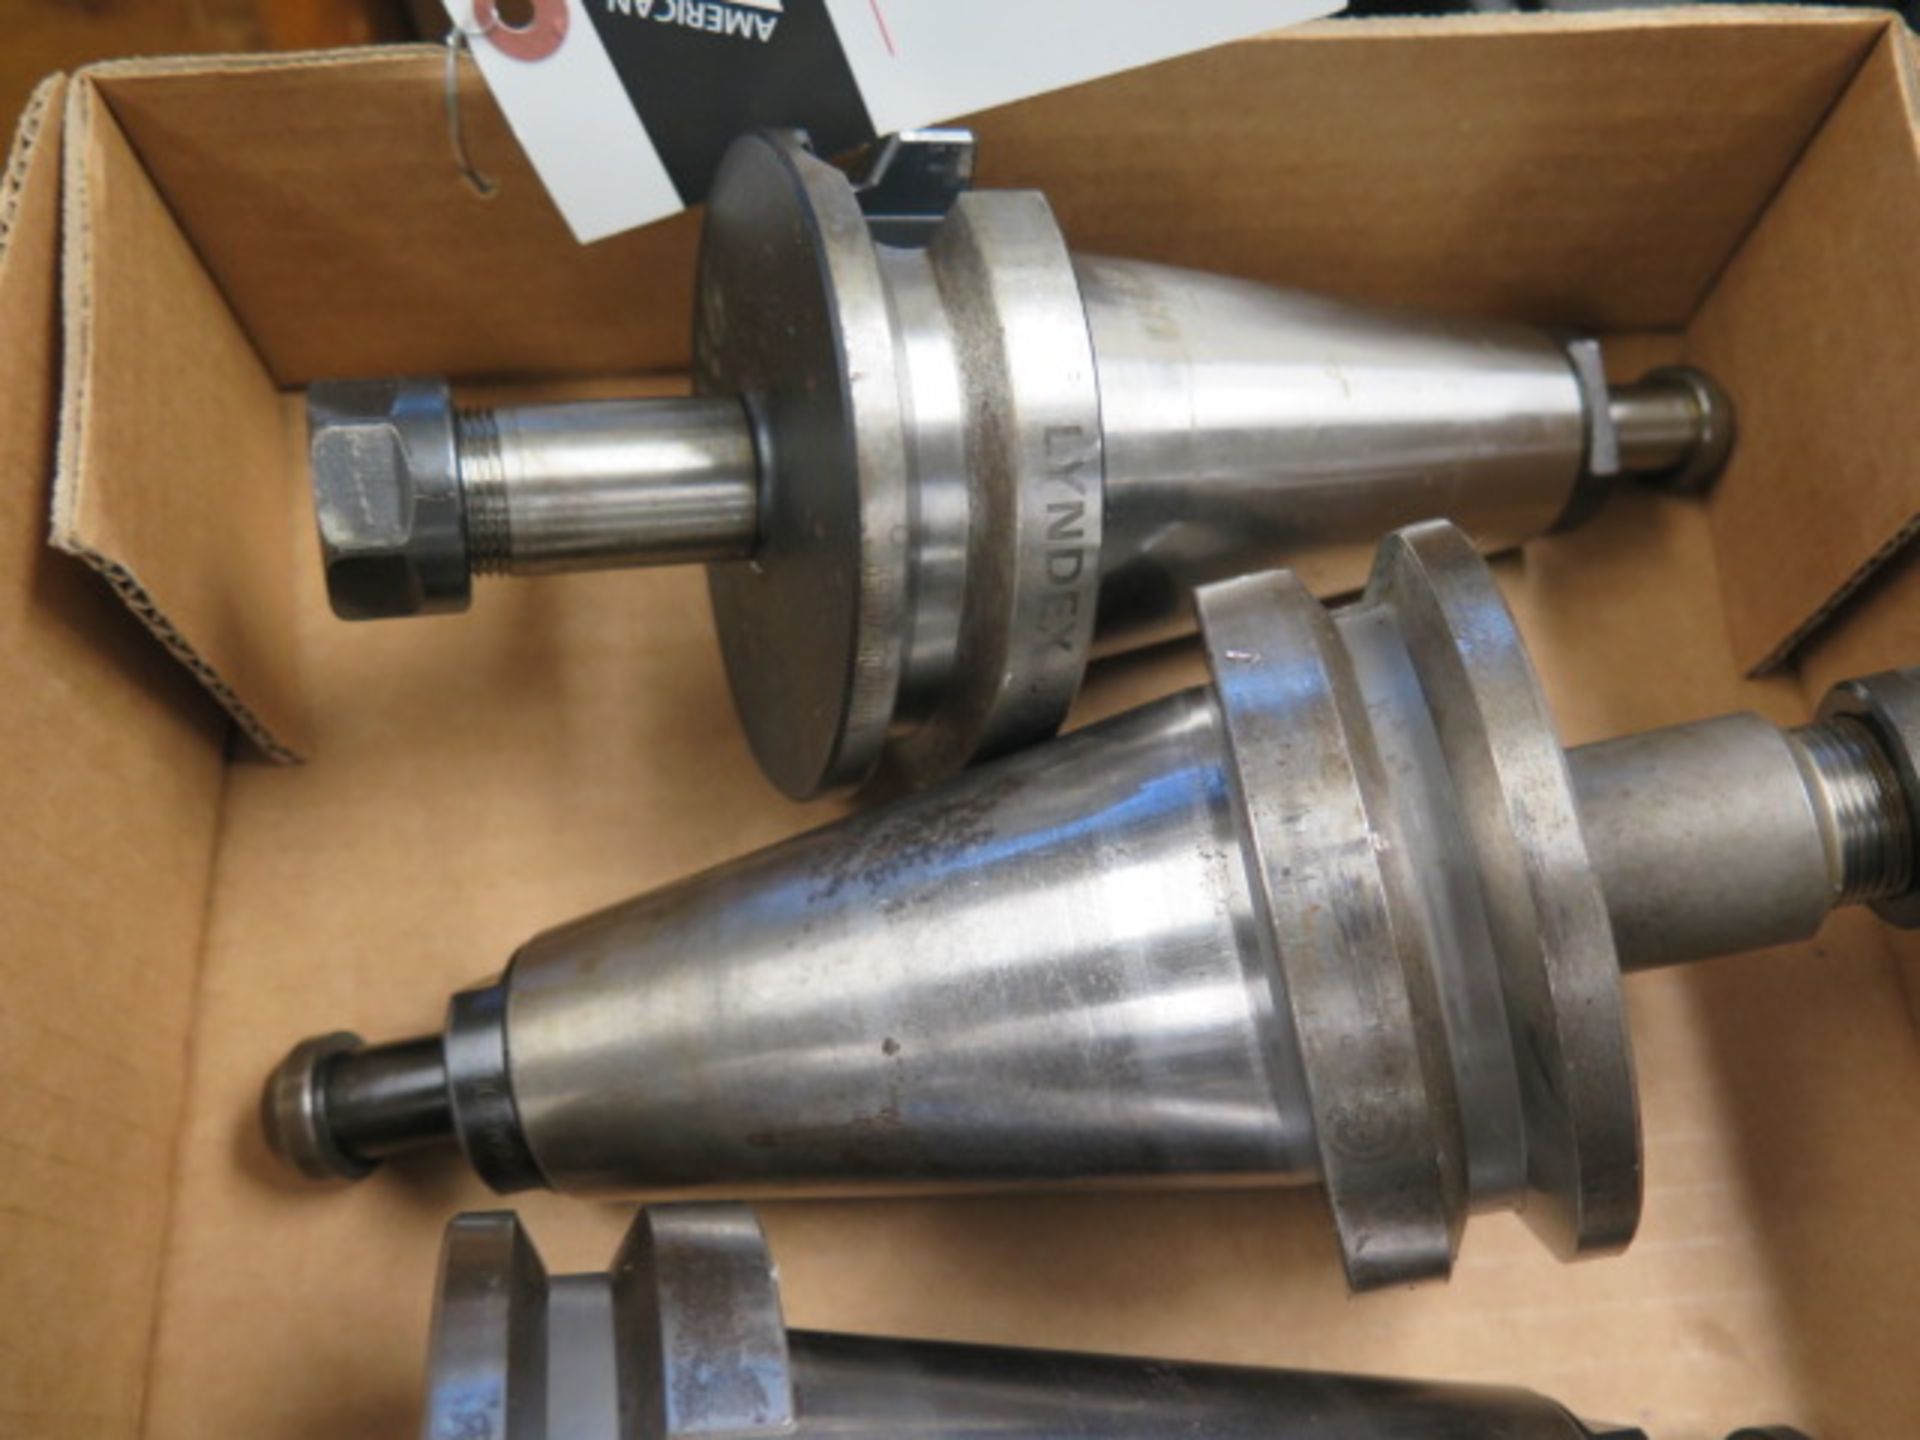 BT-50 Taper ER20 Collet Chucks (5) (SOLD AS-IS - NO WARRANTY) (Located @ 2229 Ringwood Ave. San Jose - Image 3 of 6